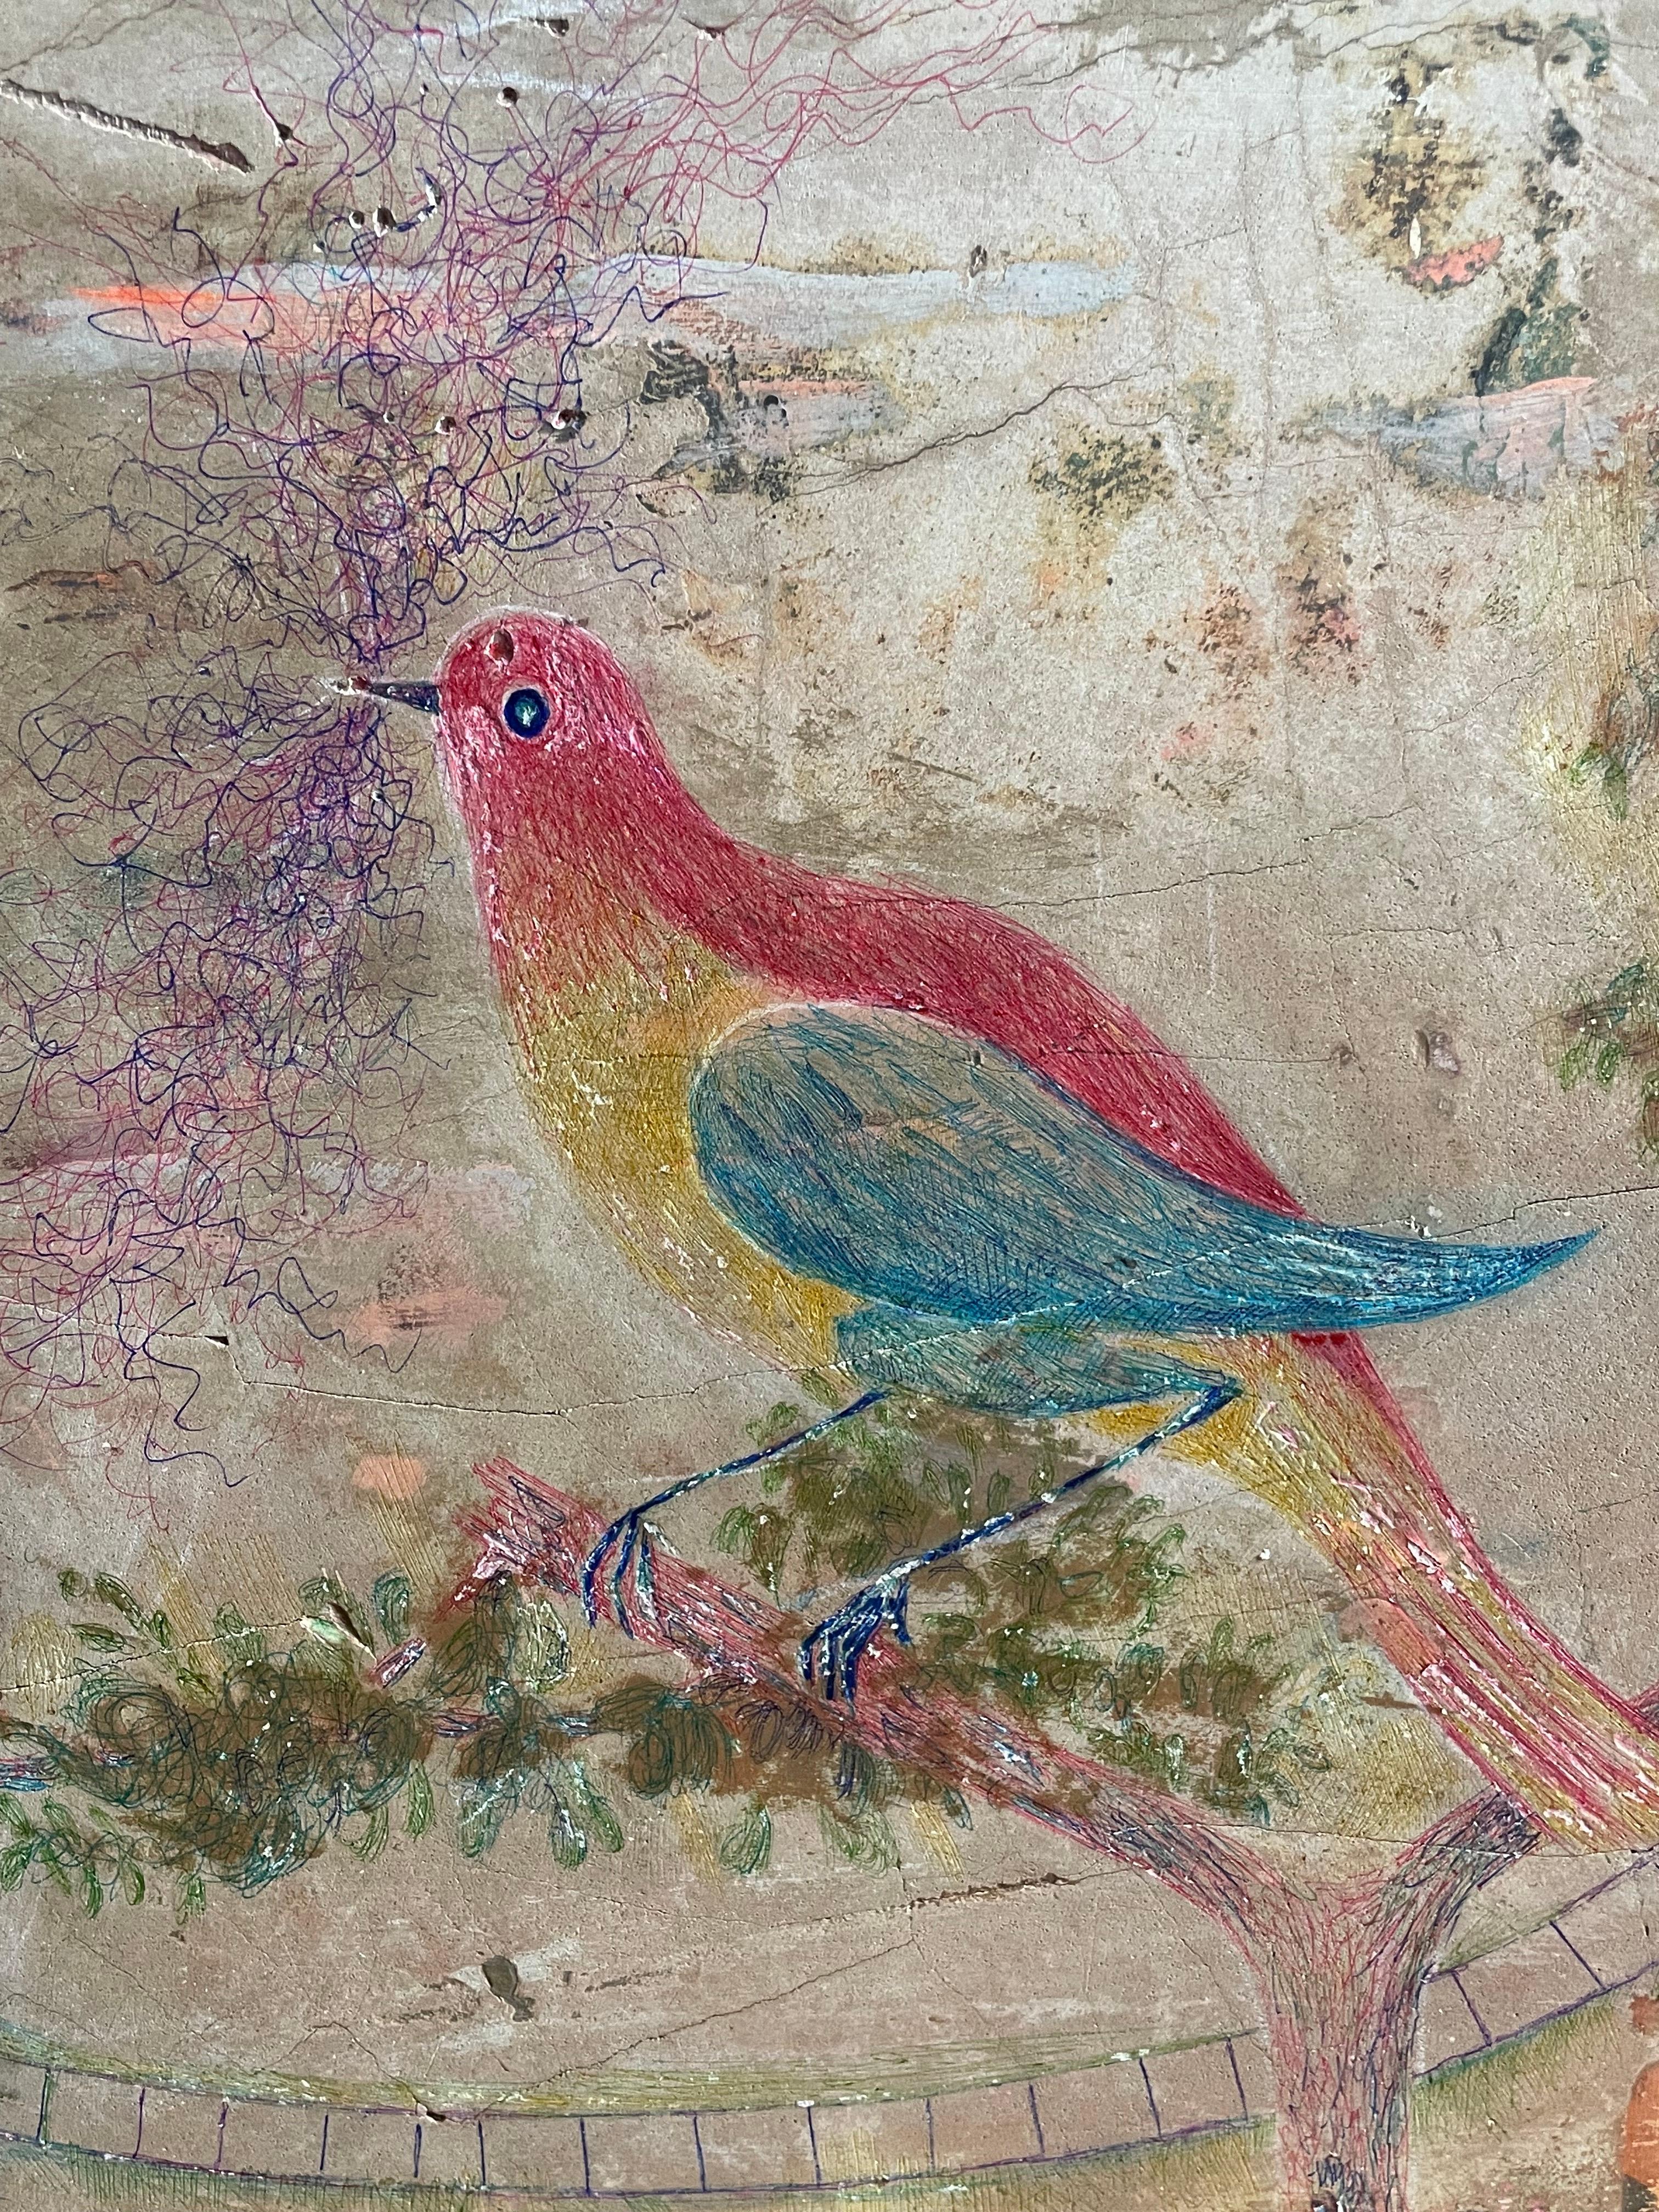 Wonderful painting with bright hues by New York artist Kevin Paulsen. With a central bird motif, surrounded by trees, houses, and other various designs. Pigment and ink on plaster and polystyrene, intended to look like a fragment. Mounted in wooden